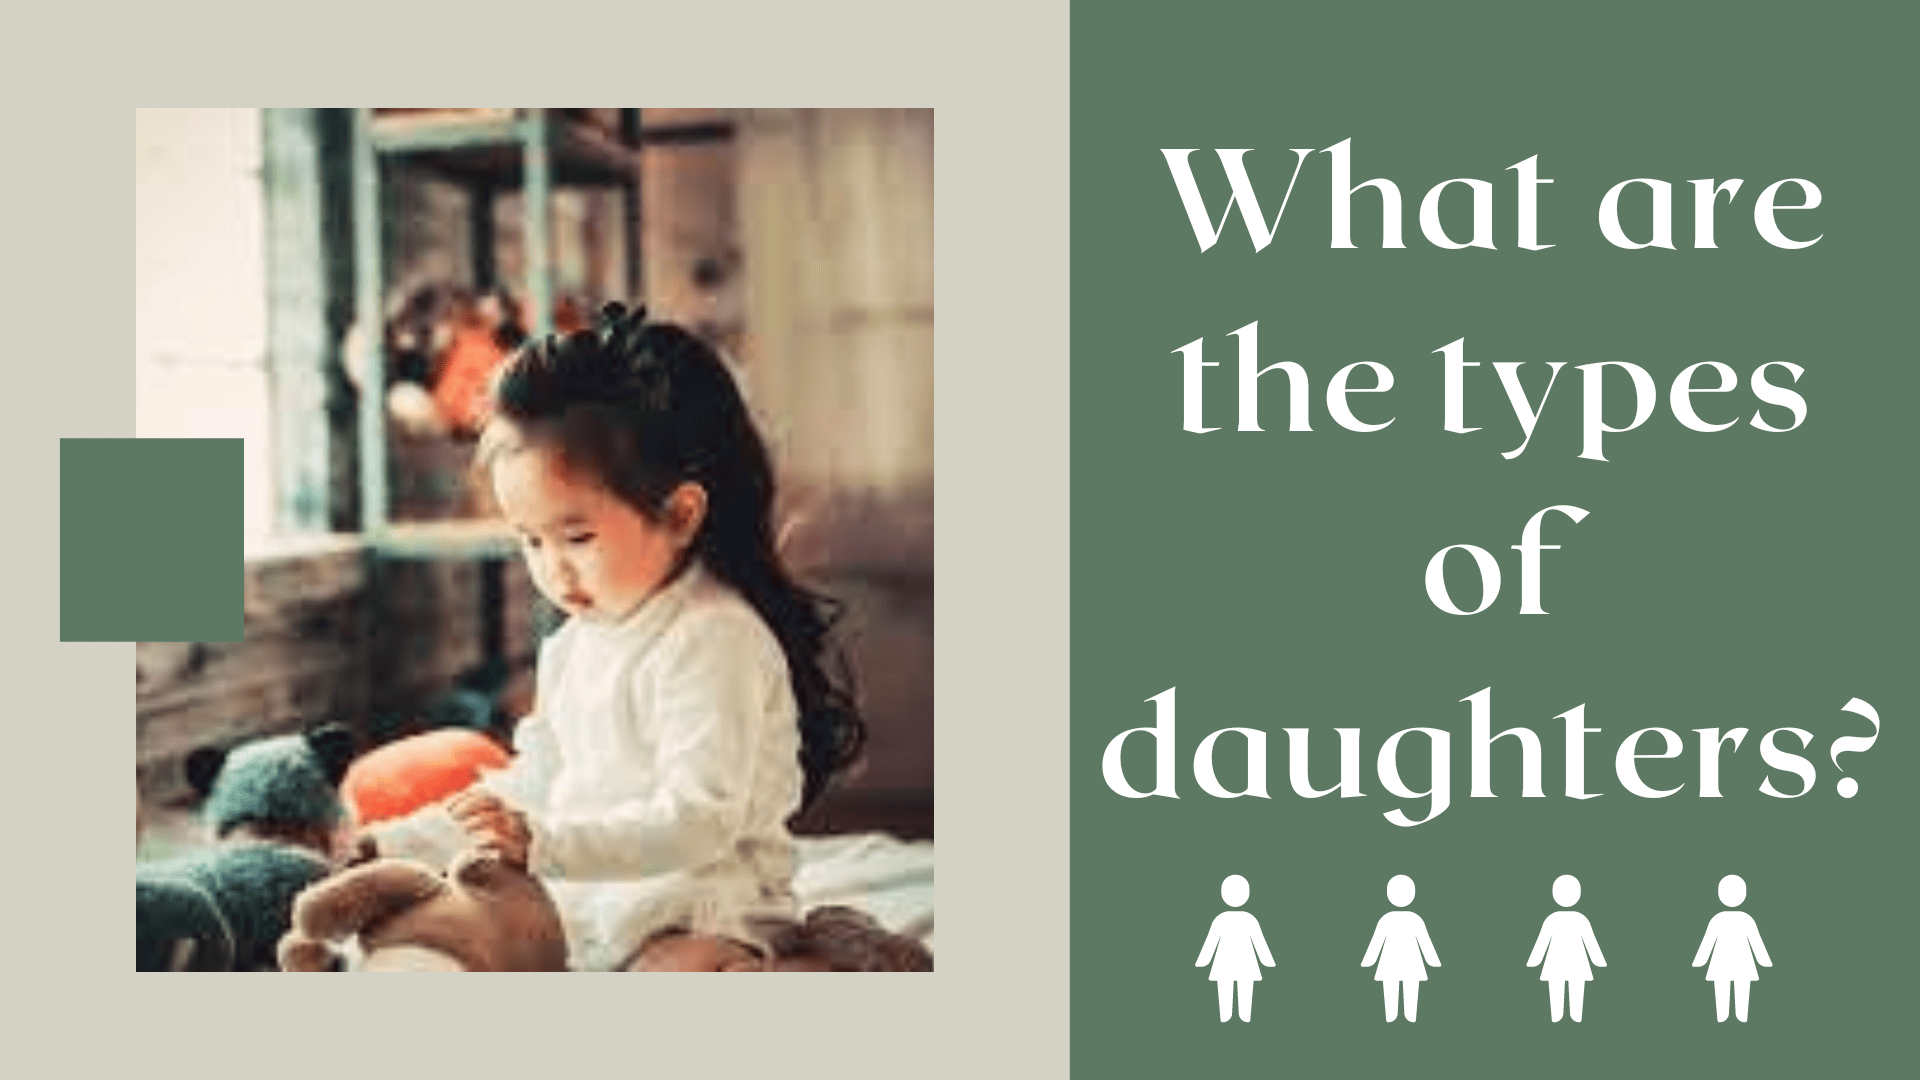 8 types of daughters l The full meaning of daughter